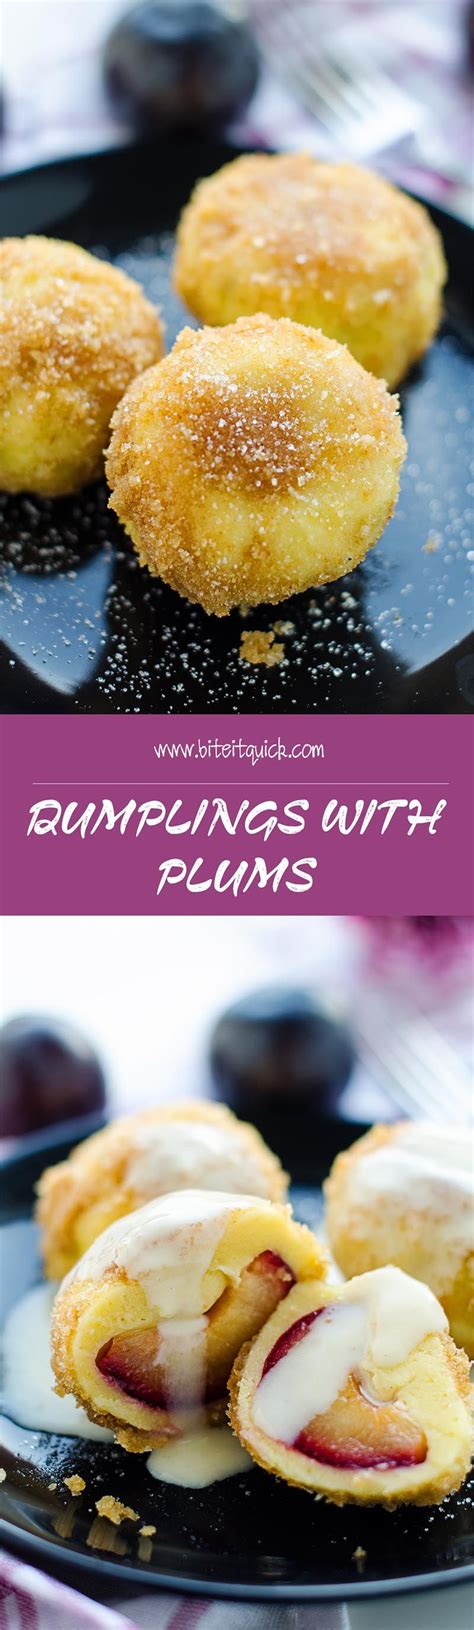 Dumplings From Tasty Potato Dough Stuffed With Sweet Fresh Plums And